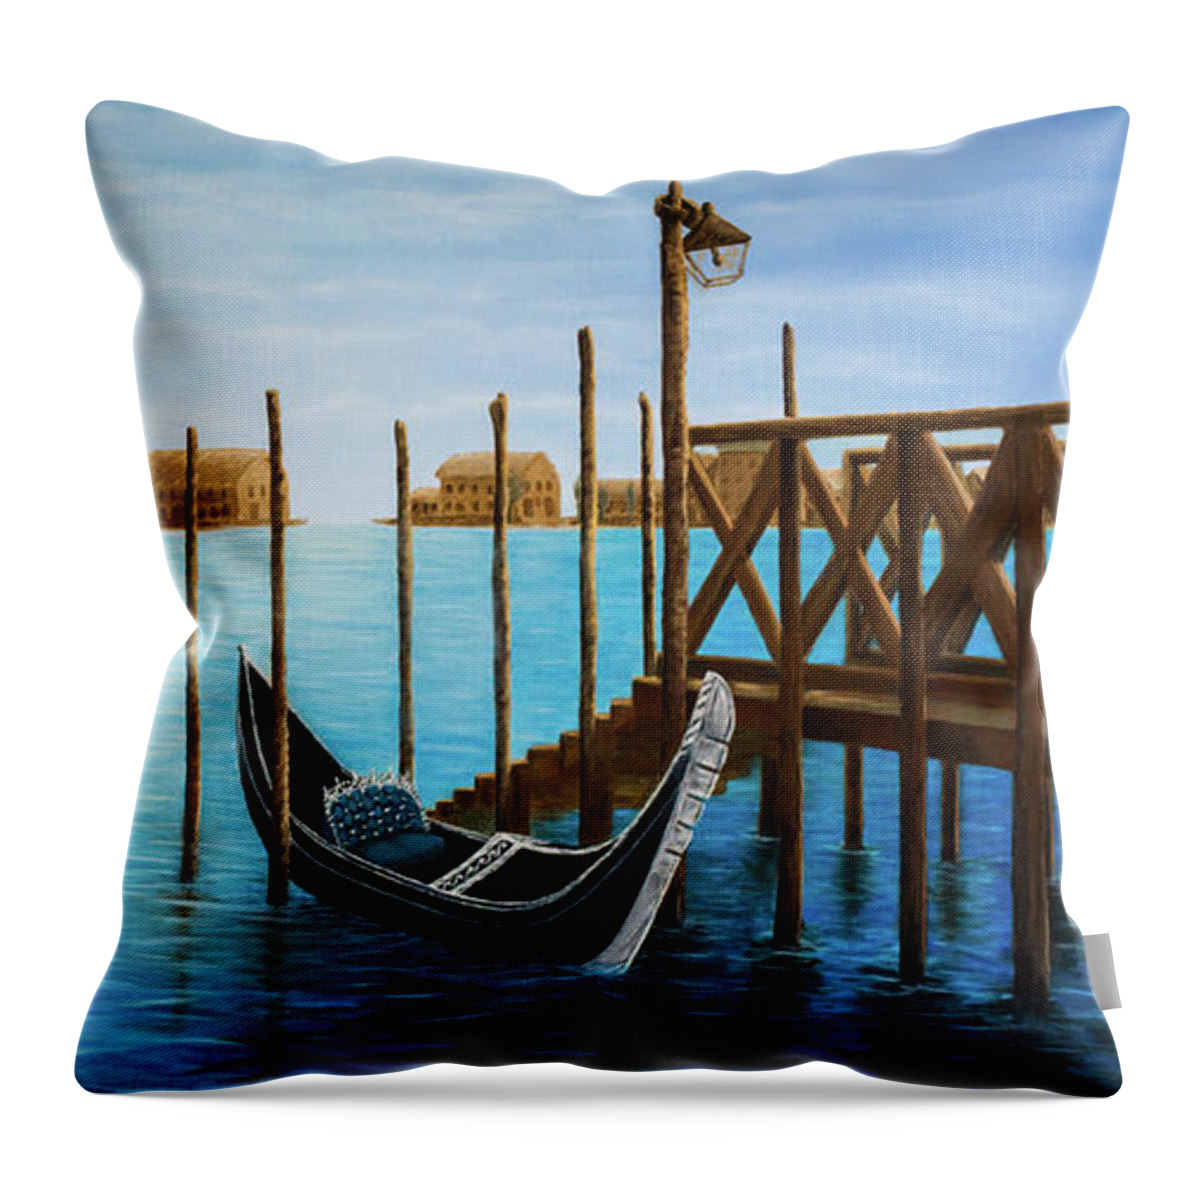 Venice Throw Pillow featuring the painting The Venetian Phoenix by Renee Logan